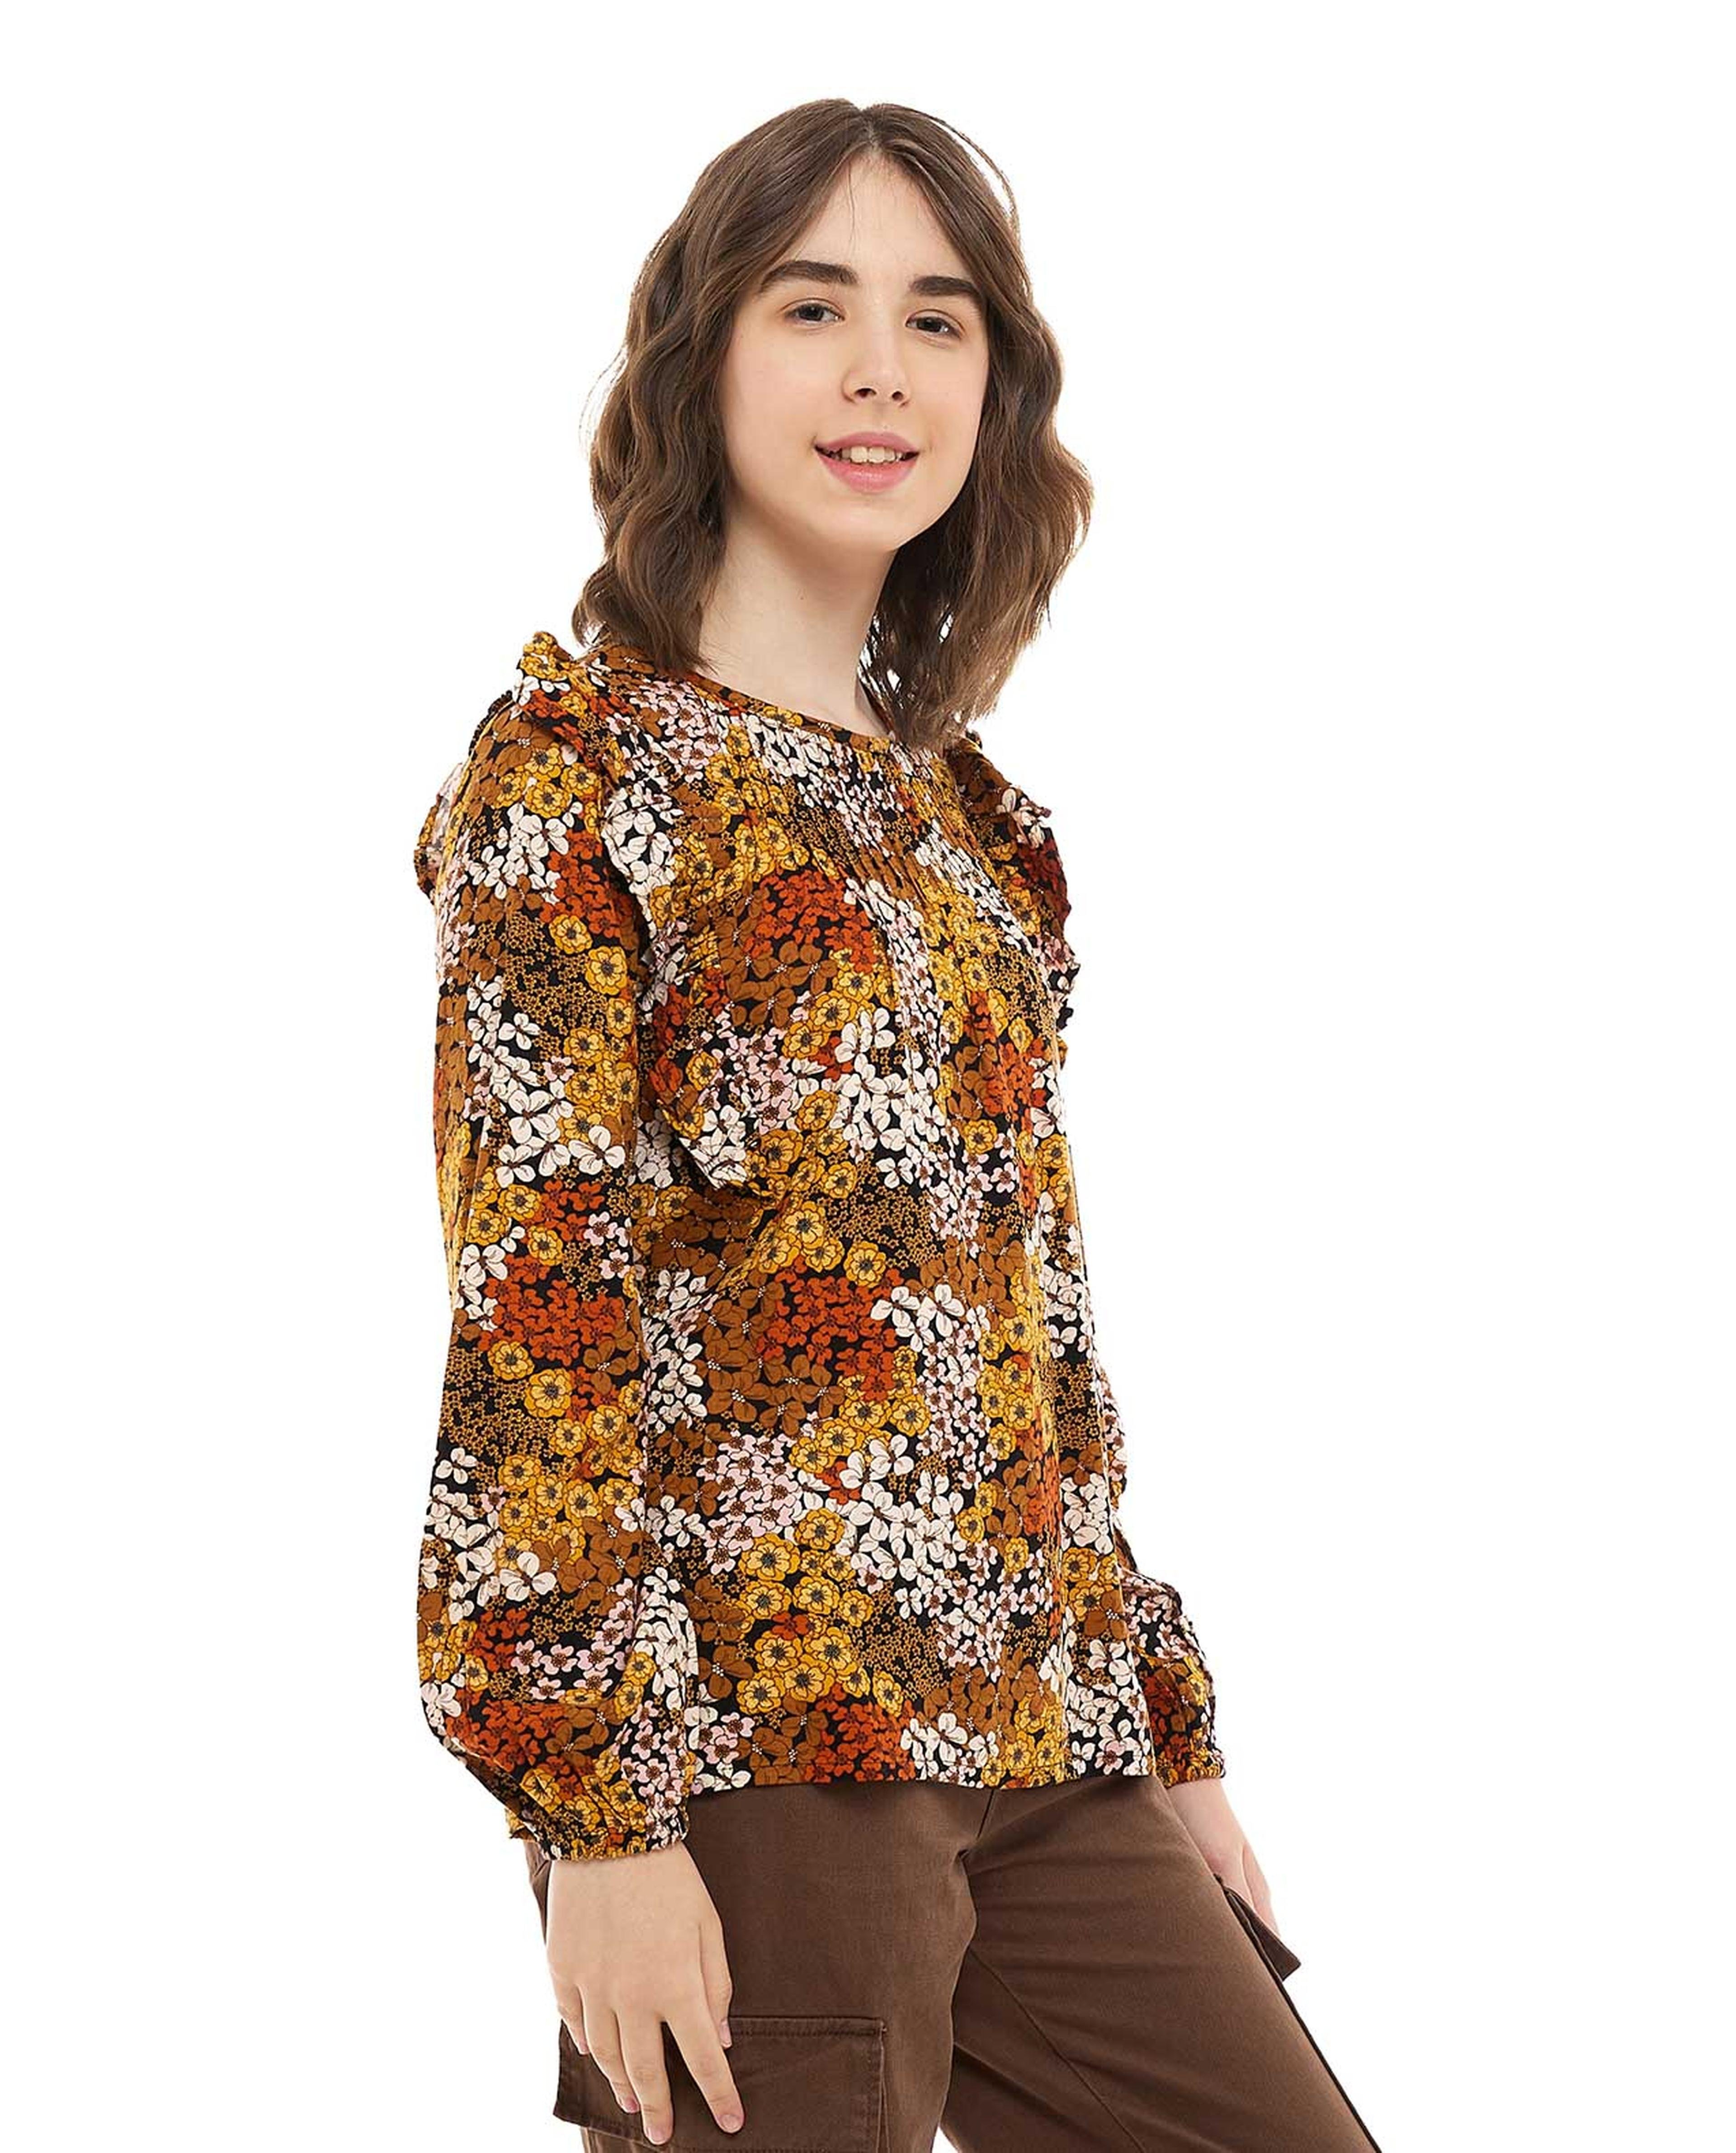 Patterned Top with Crew Neck and Long Sleeves